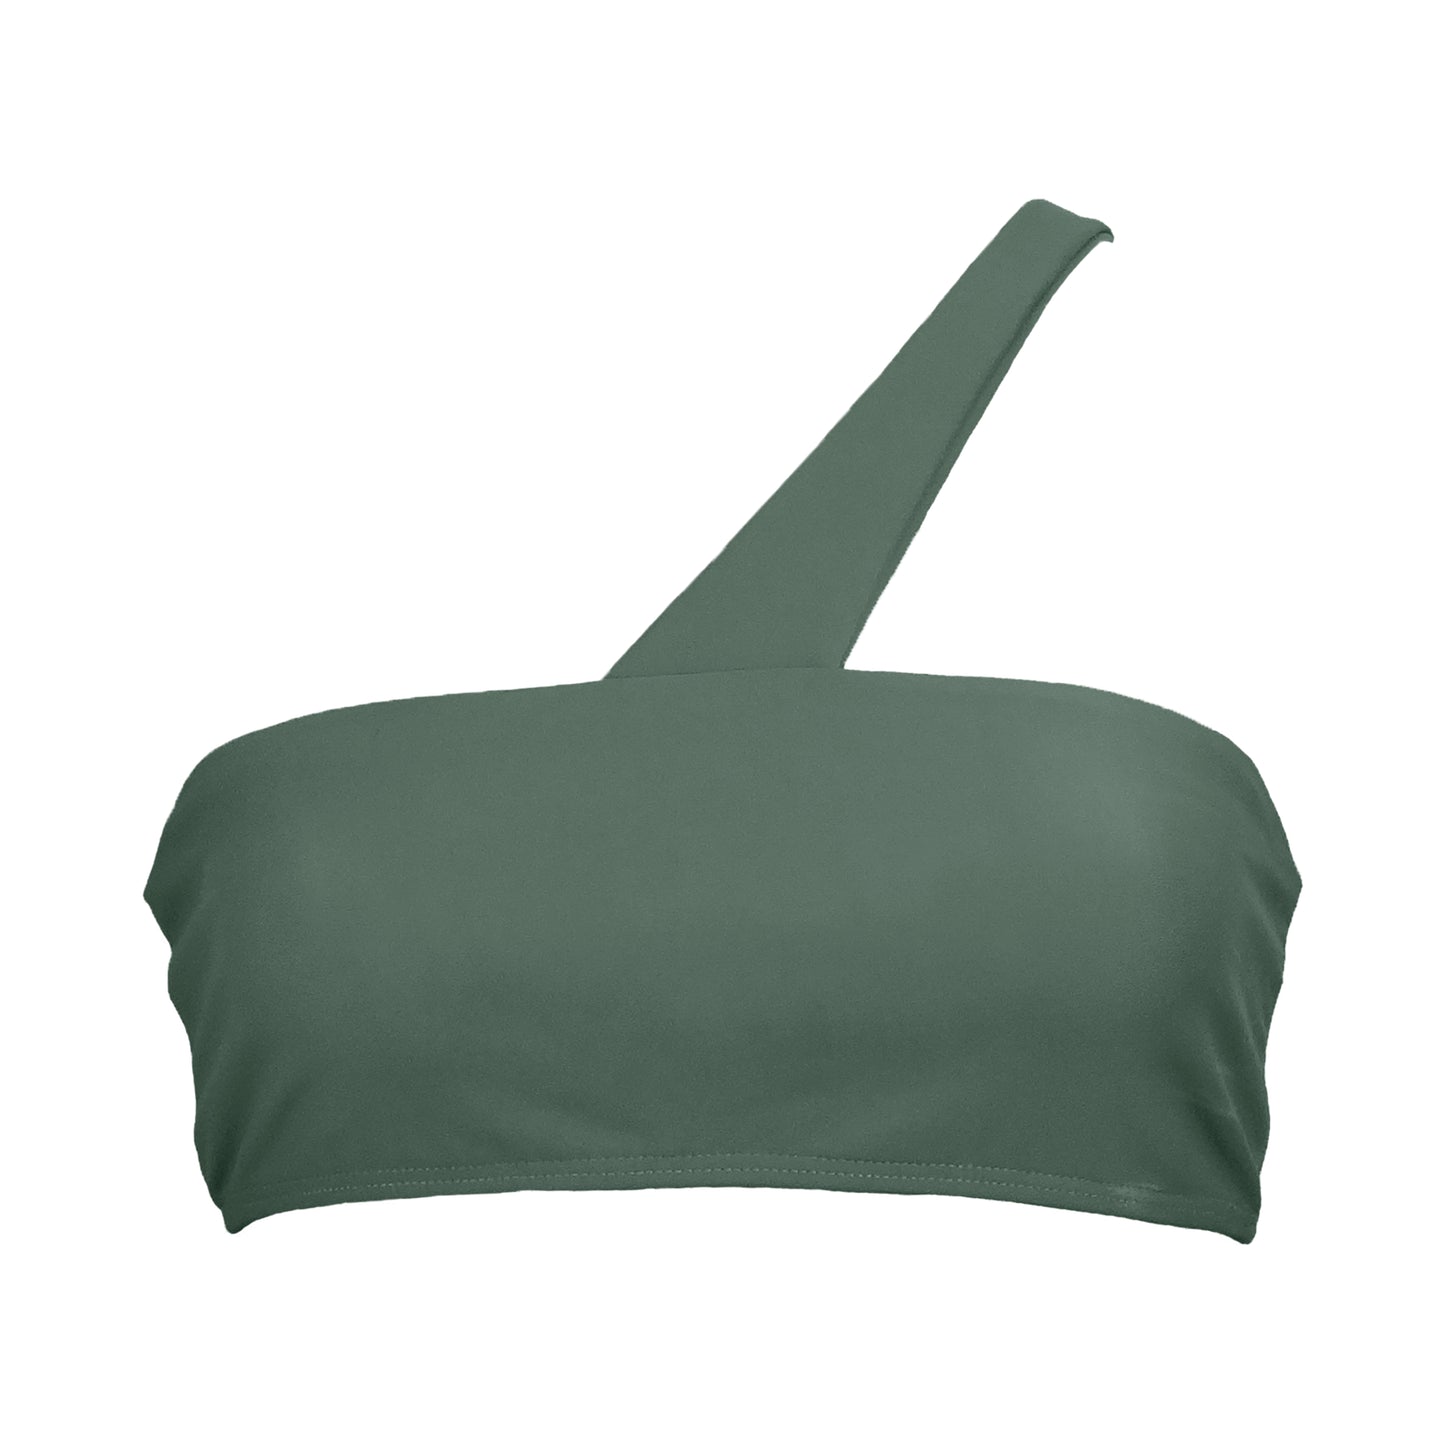 Sage Green Asymmetric bikini top with strapless top fit and double back strap detail.